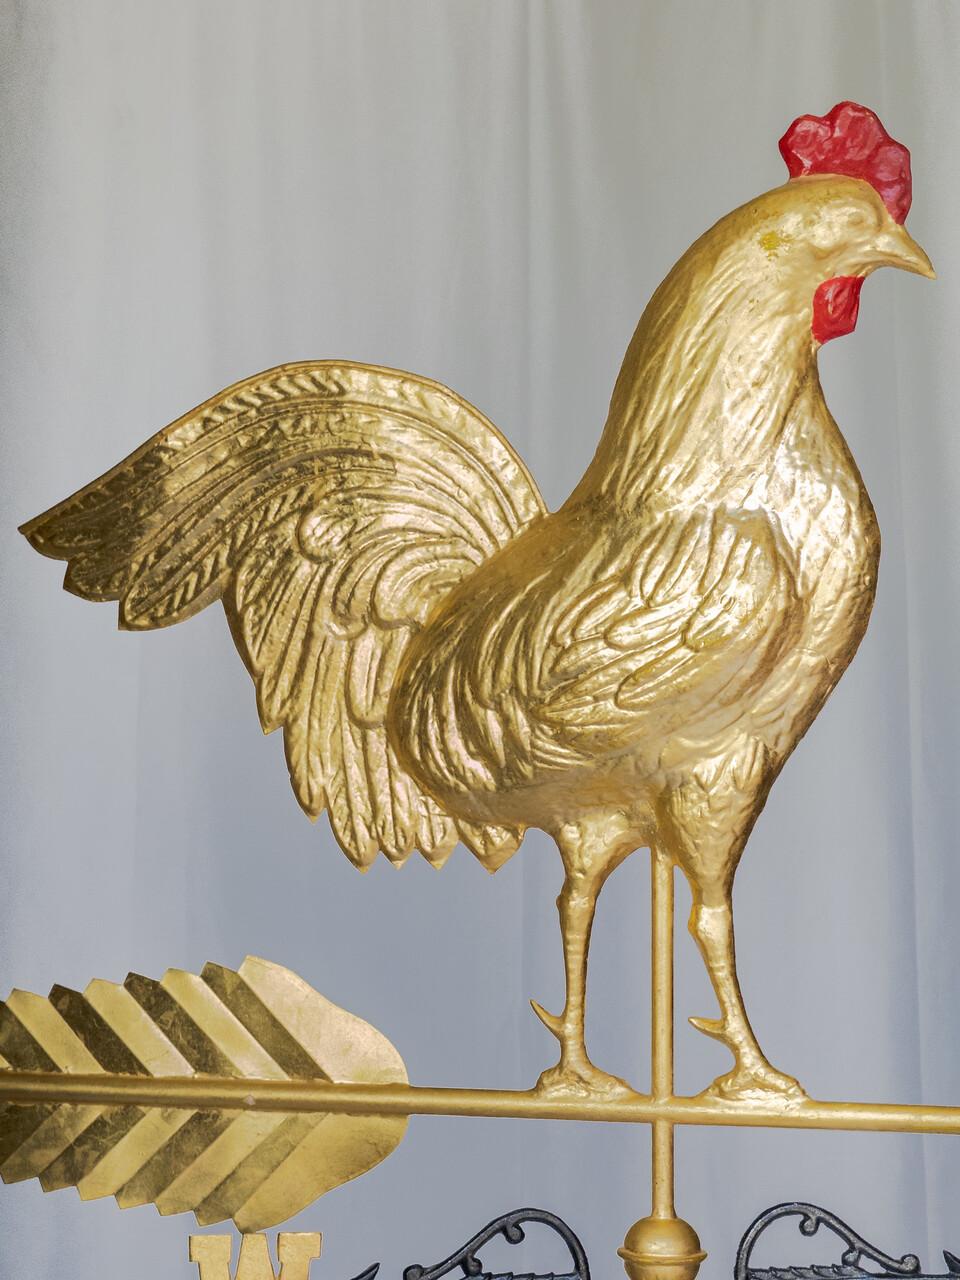 This 19th-century American rooster weathervane boasts intricate craftsmanship, with brass finish over copper, a testament to the era's skilled artisans. Standing proudly atop its directional rod, the rooster's detailed feathers and bold stance